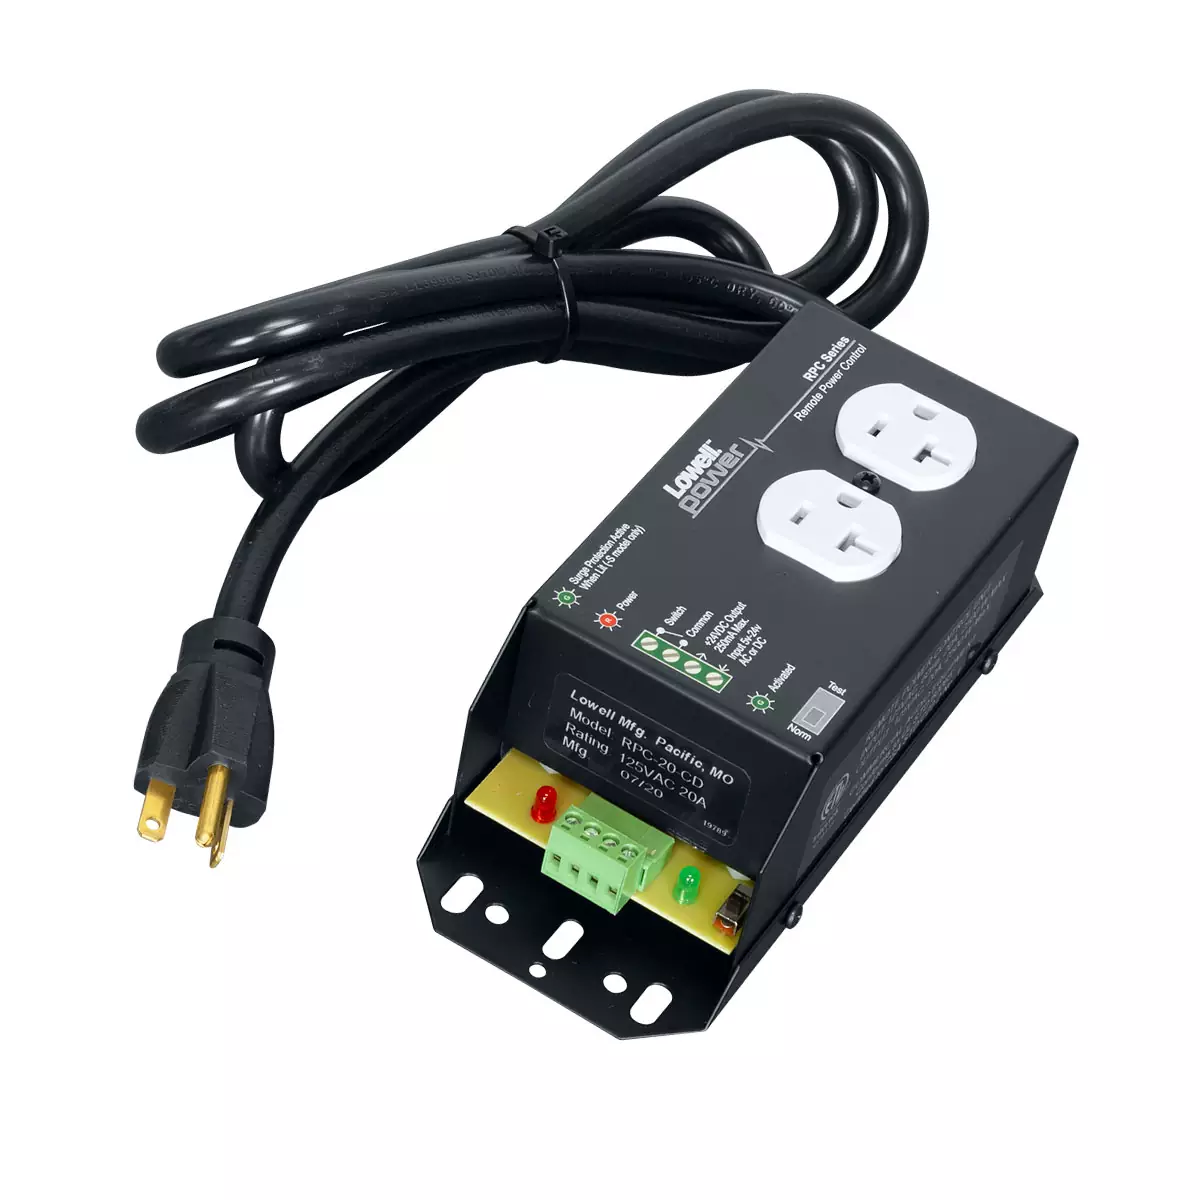 Remote Power Control with 2–20A Outlets